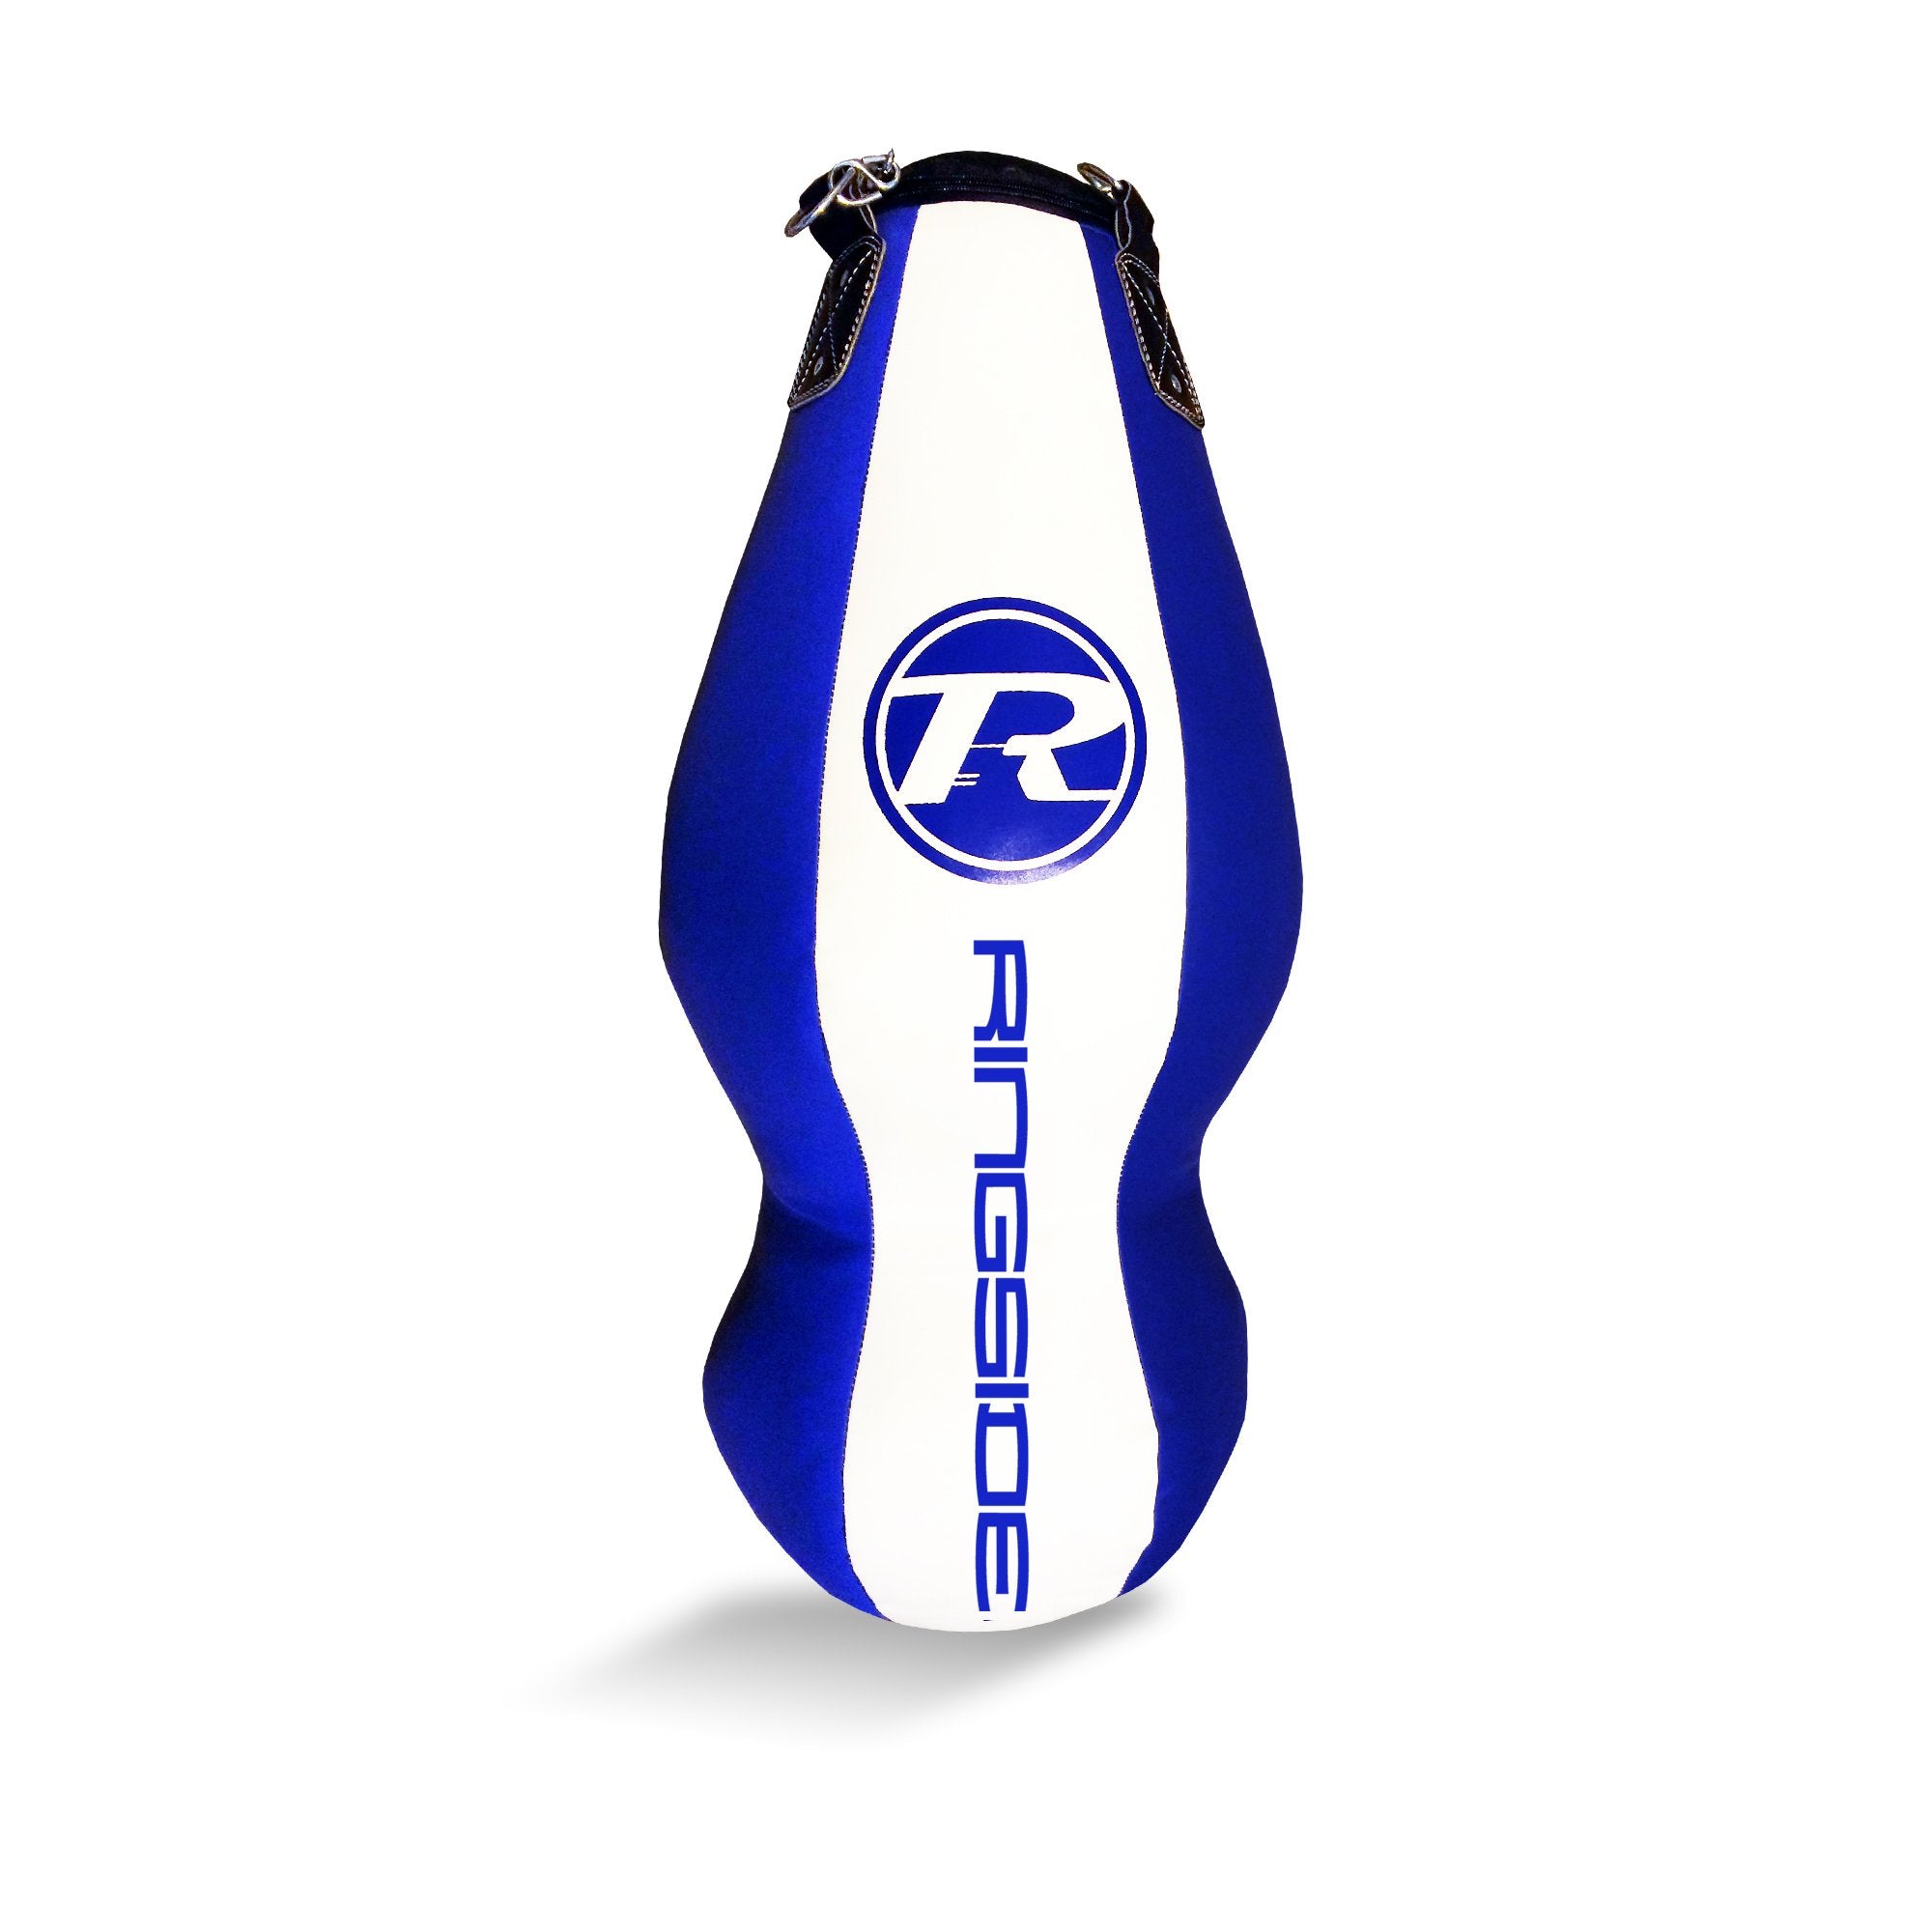 Synthetic Leather Double End Punch Bag - Blue / White